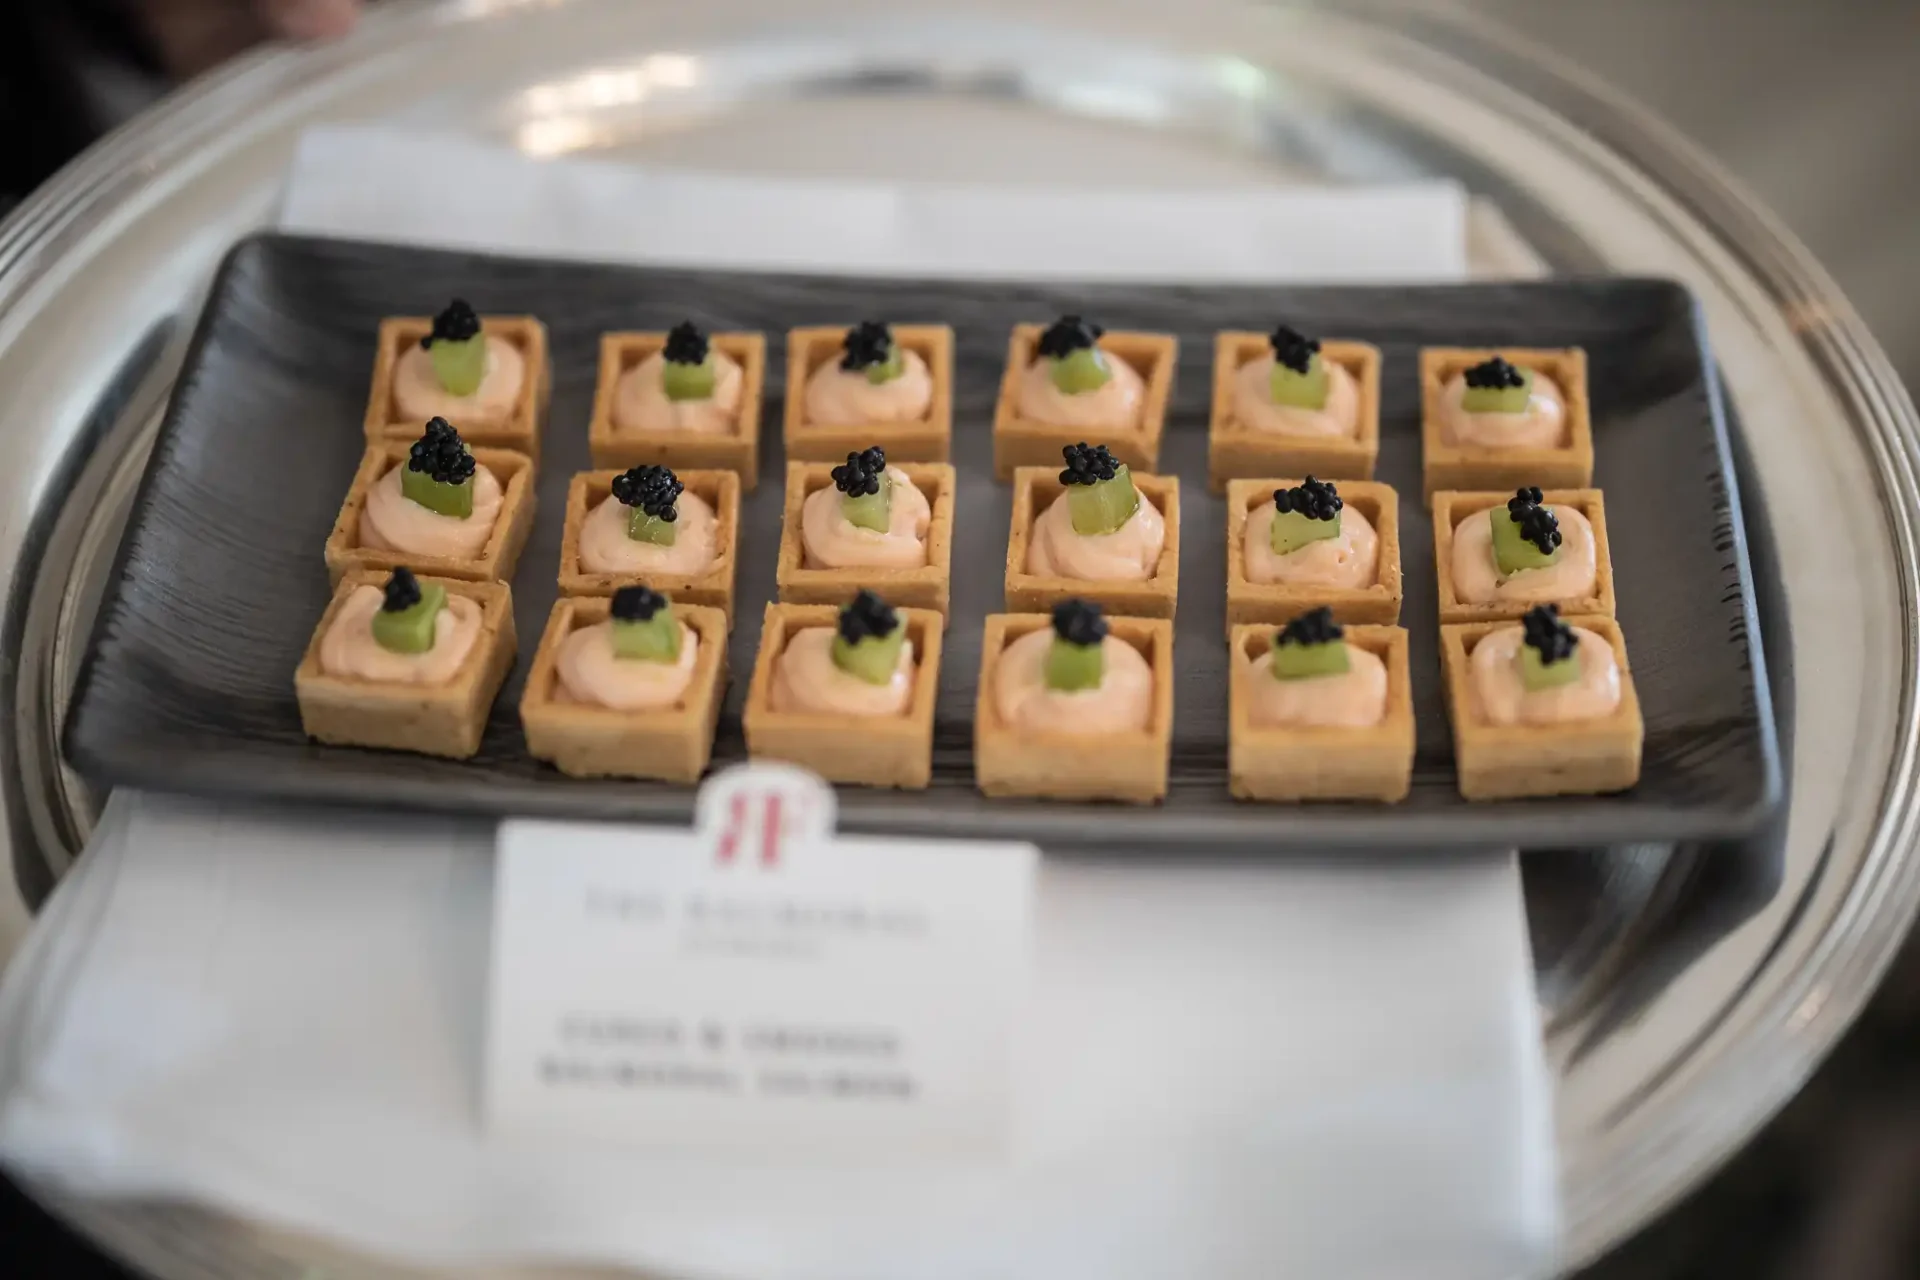 A tray of elegantly presented salmon and caviar appetizers, each garnished with a small leaf, ready to be served at an event.